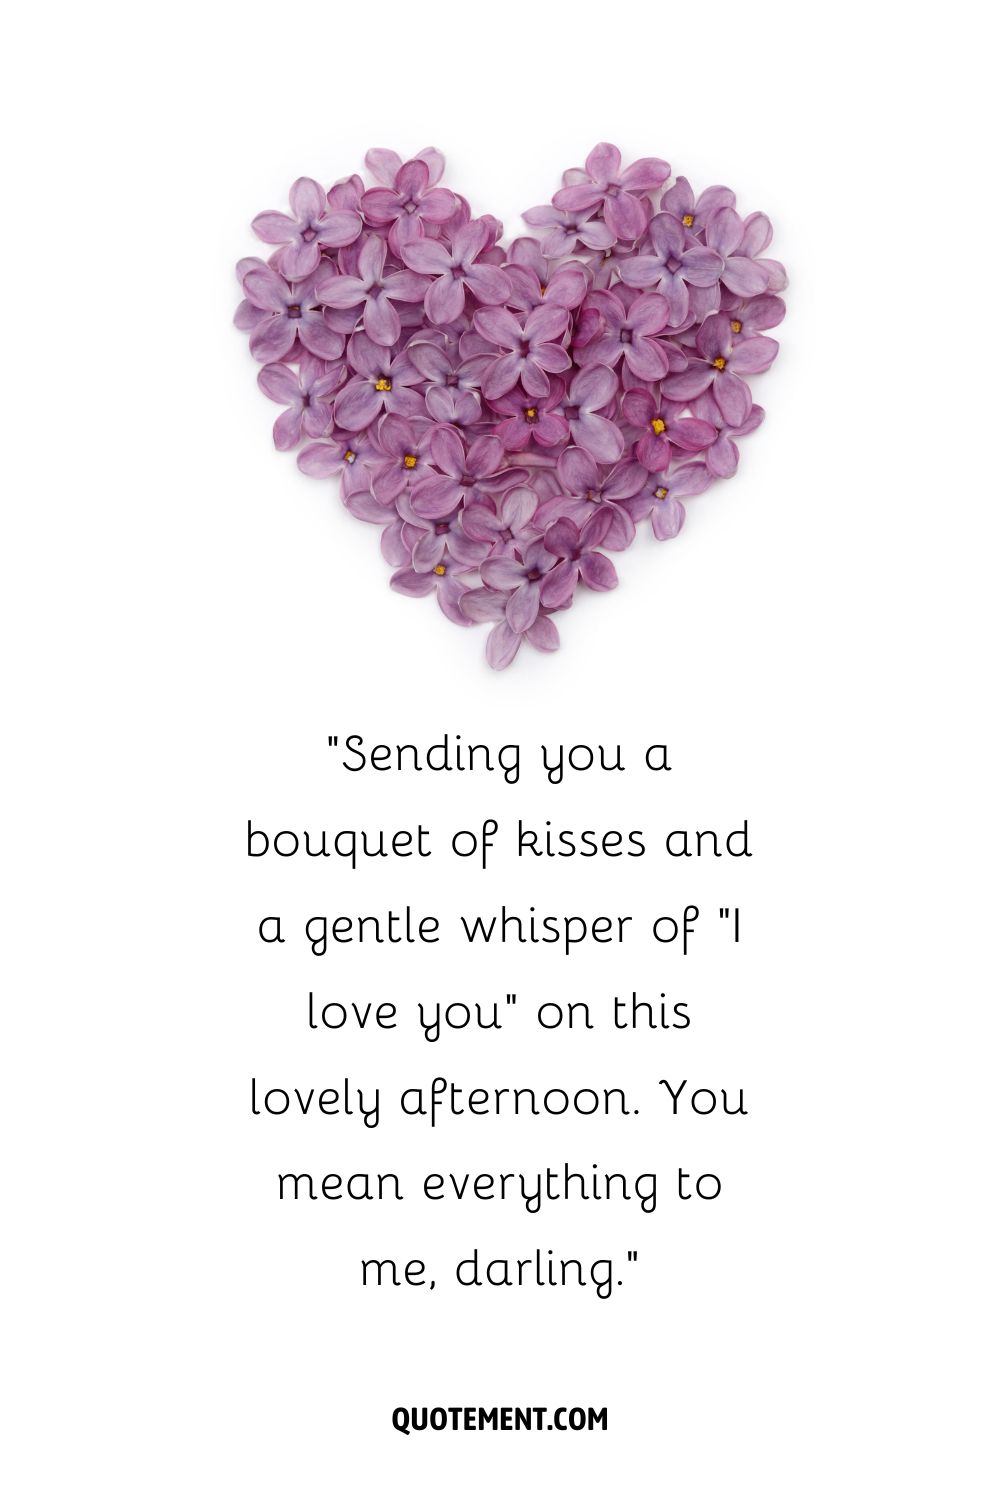 A heart made from clusters of purple lilac flowers on a white background